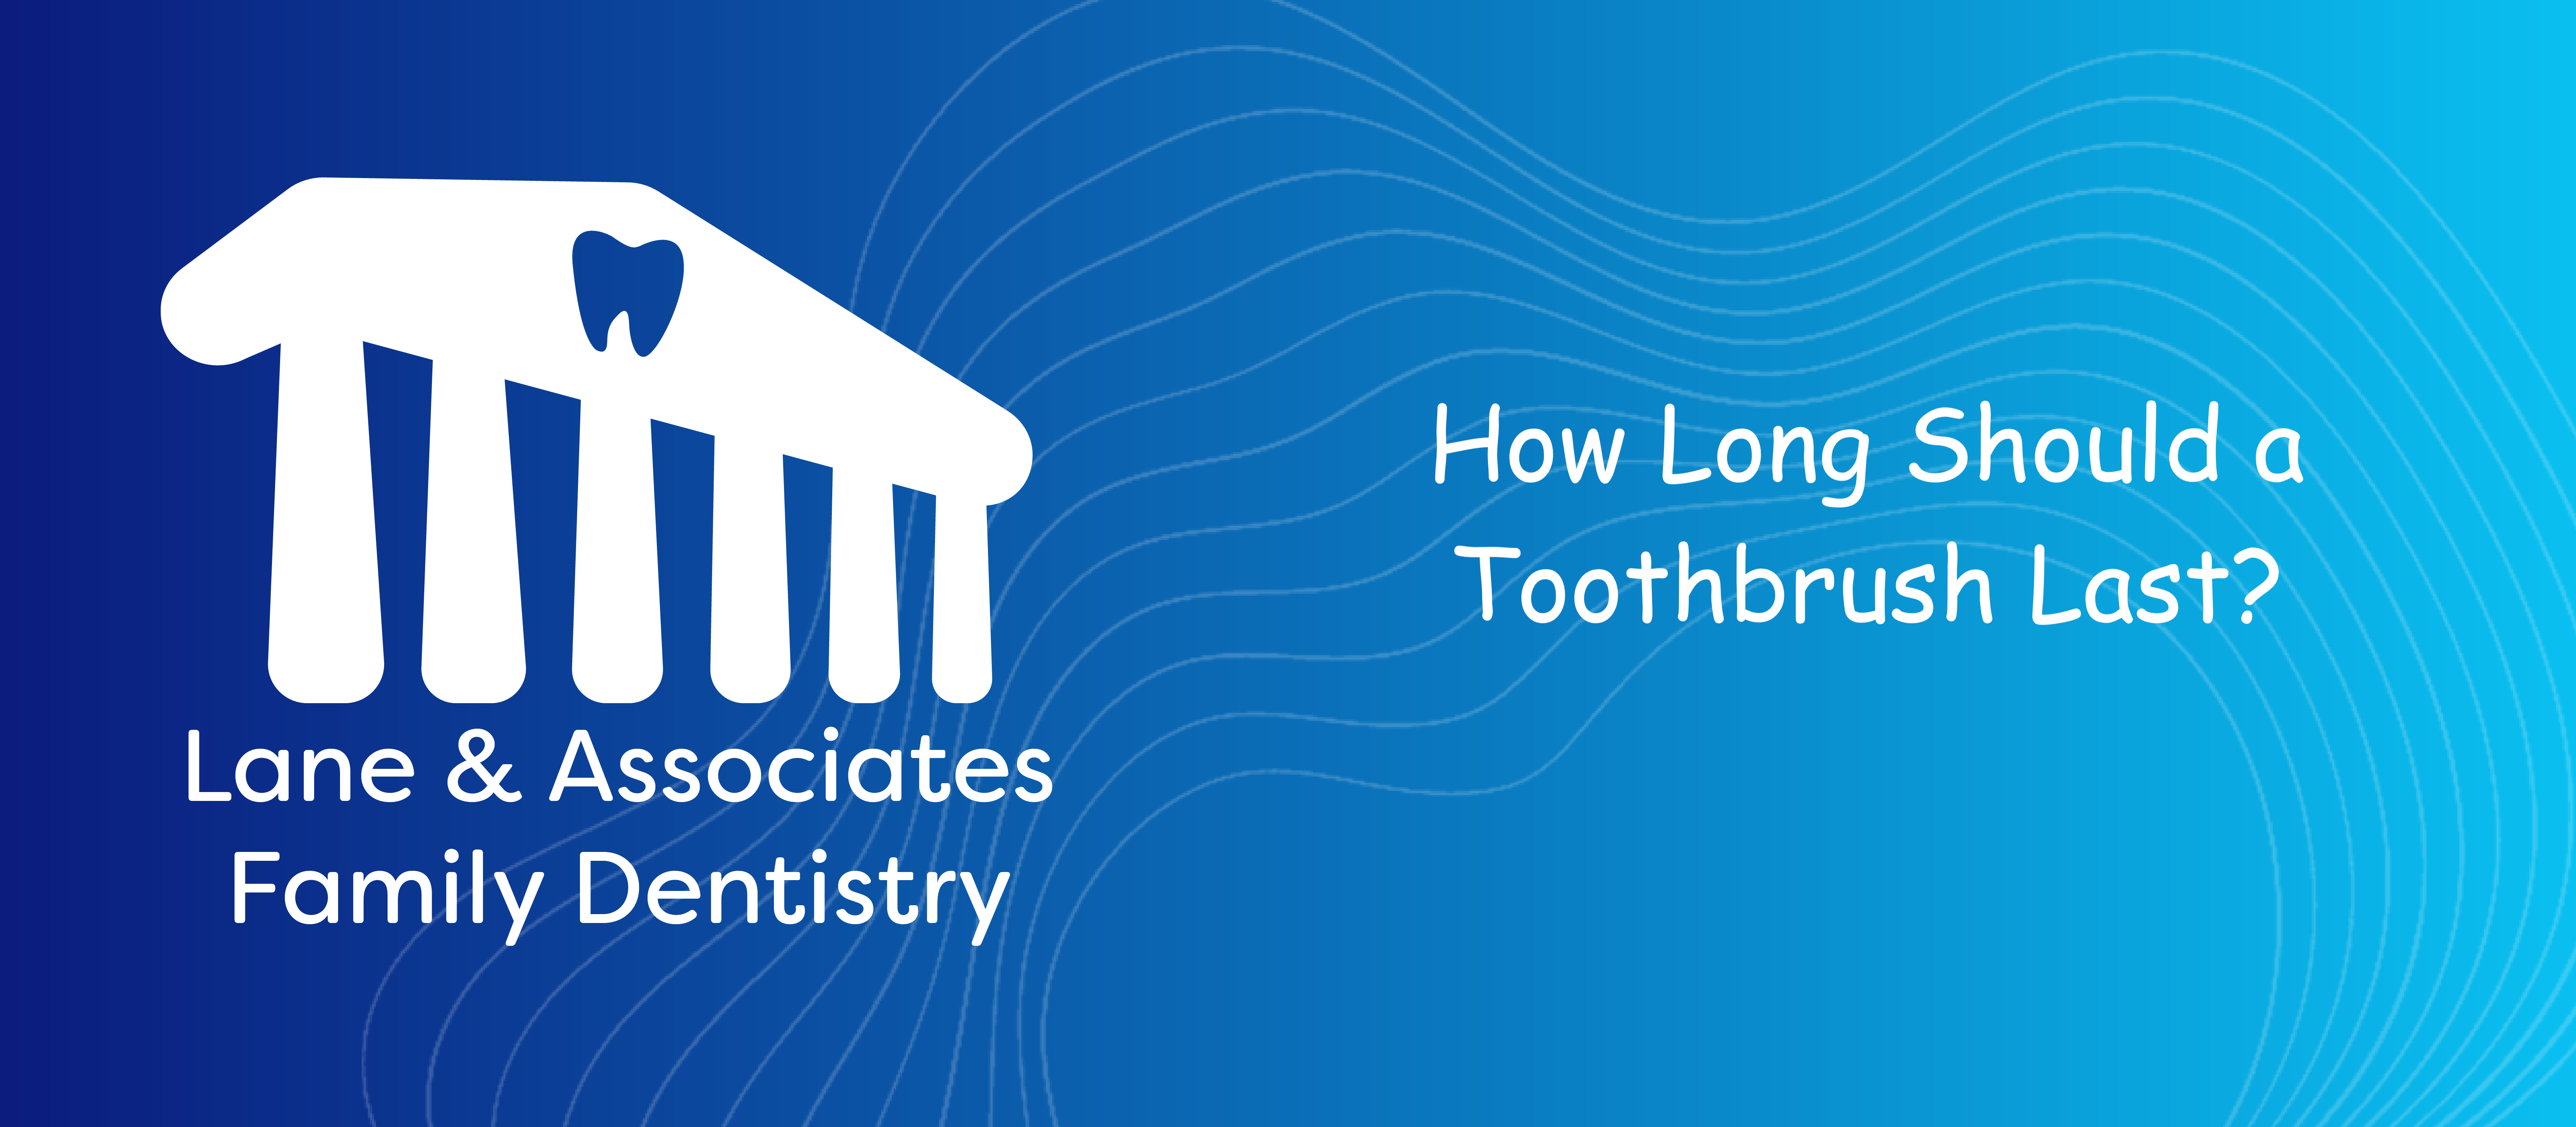 How Long Should a Toothbrush Last?